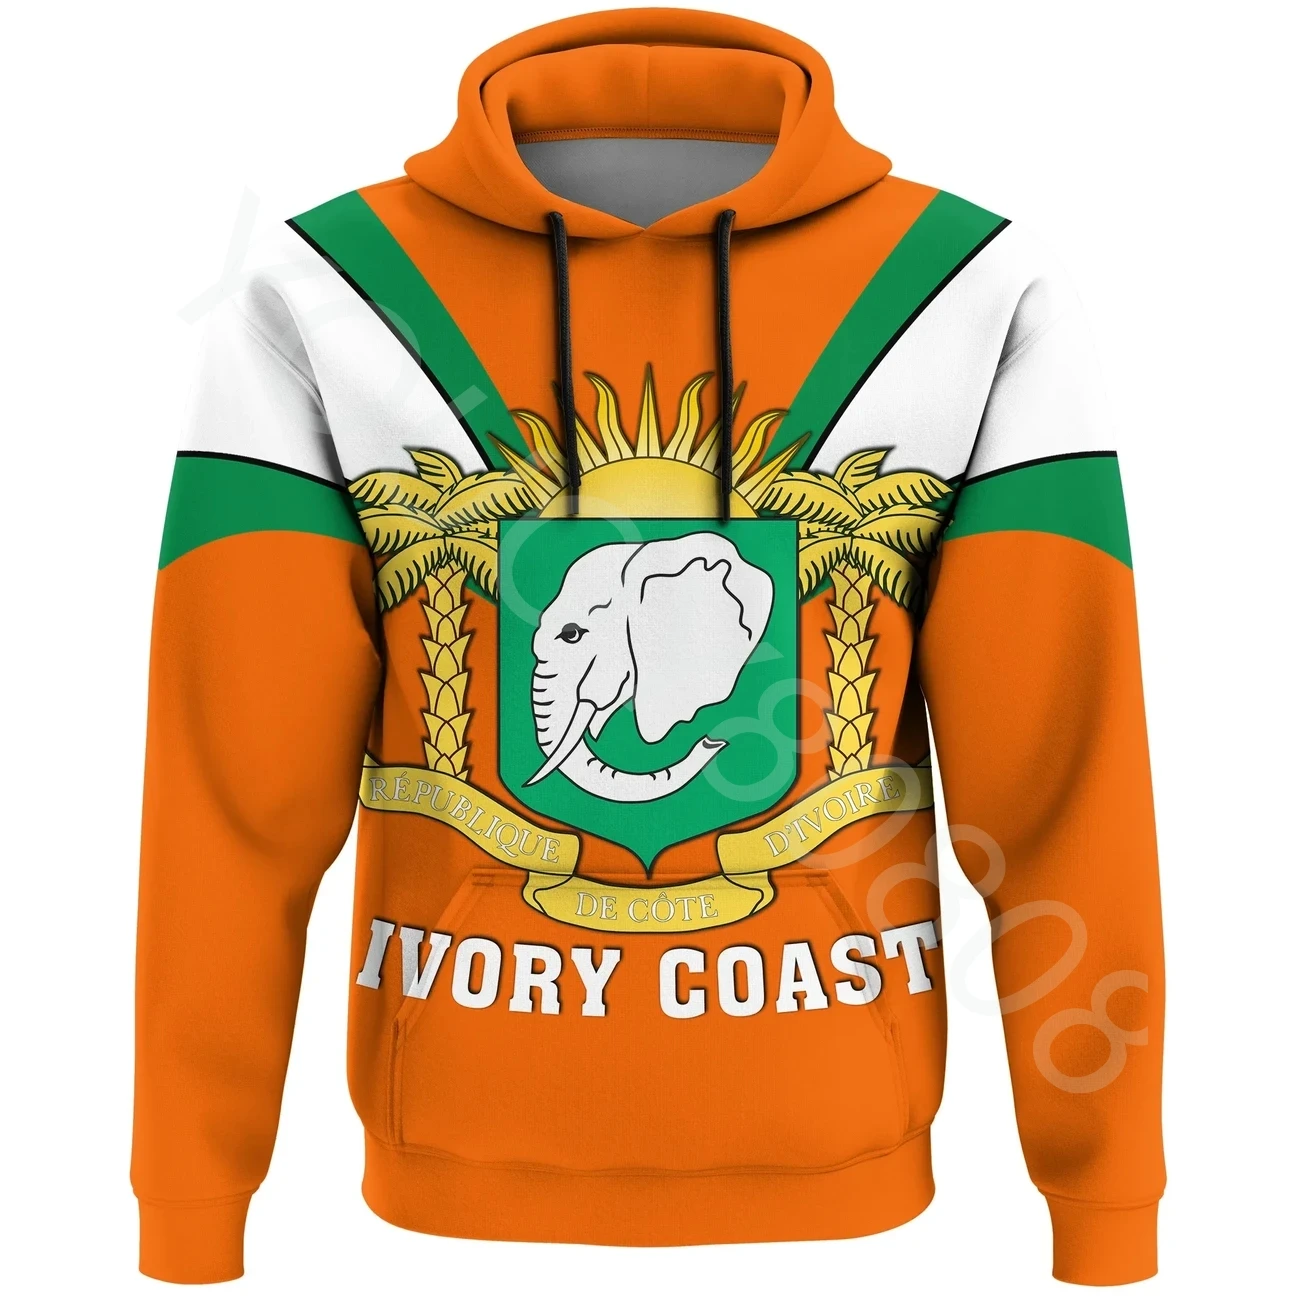 

New Fall Winter Africa Zone Hoodie Sporty Print Street Fashion for Men and Women - Ivory Coast Zipper Hoodie - Ivory Style